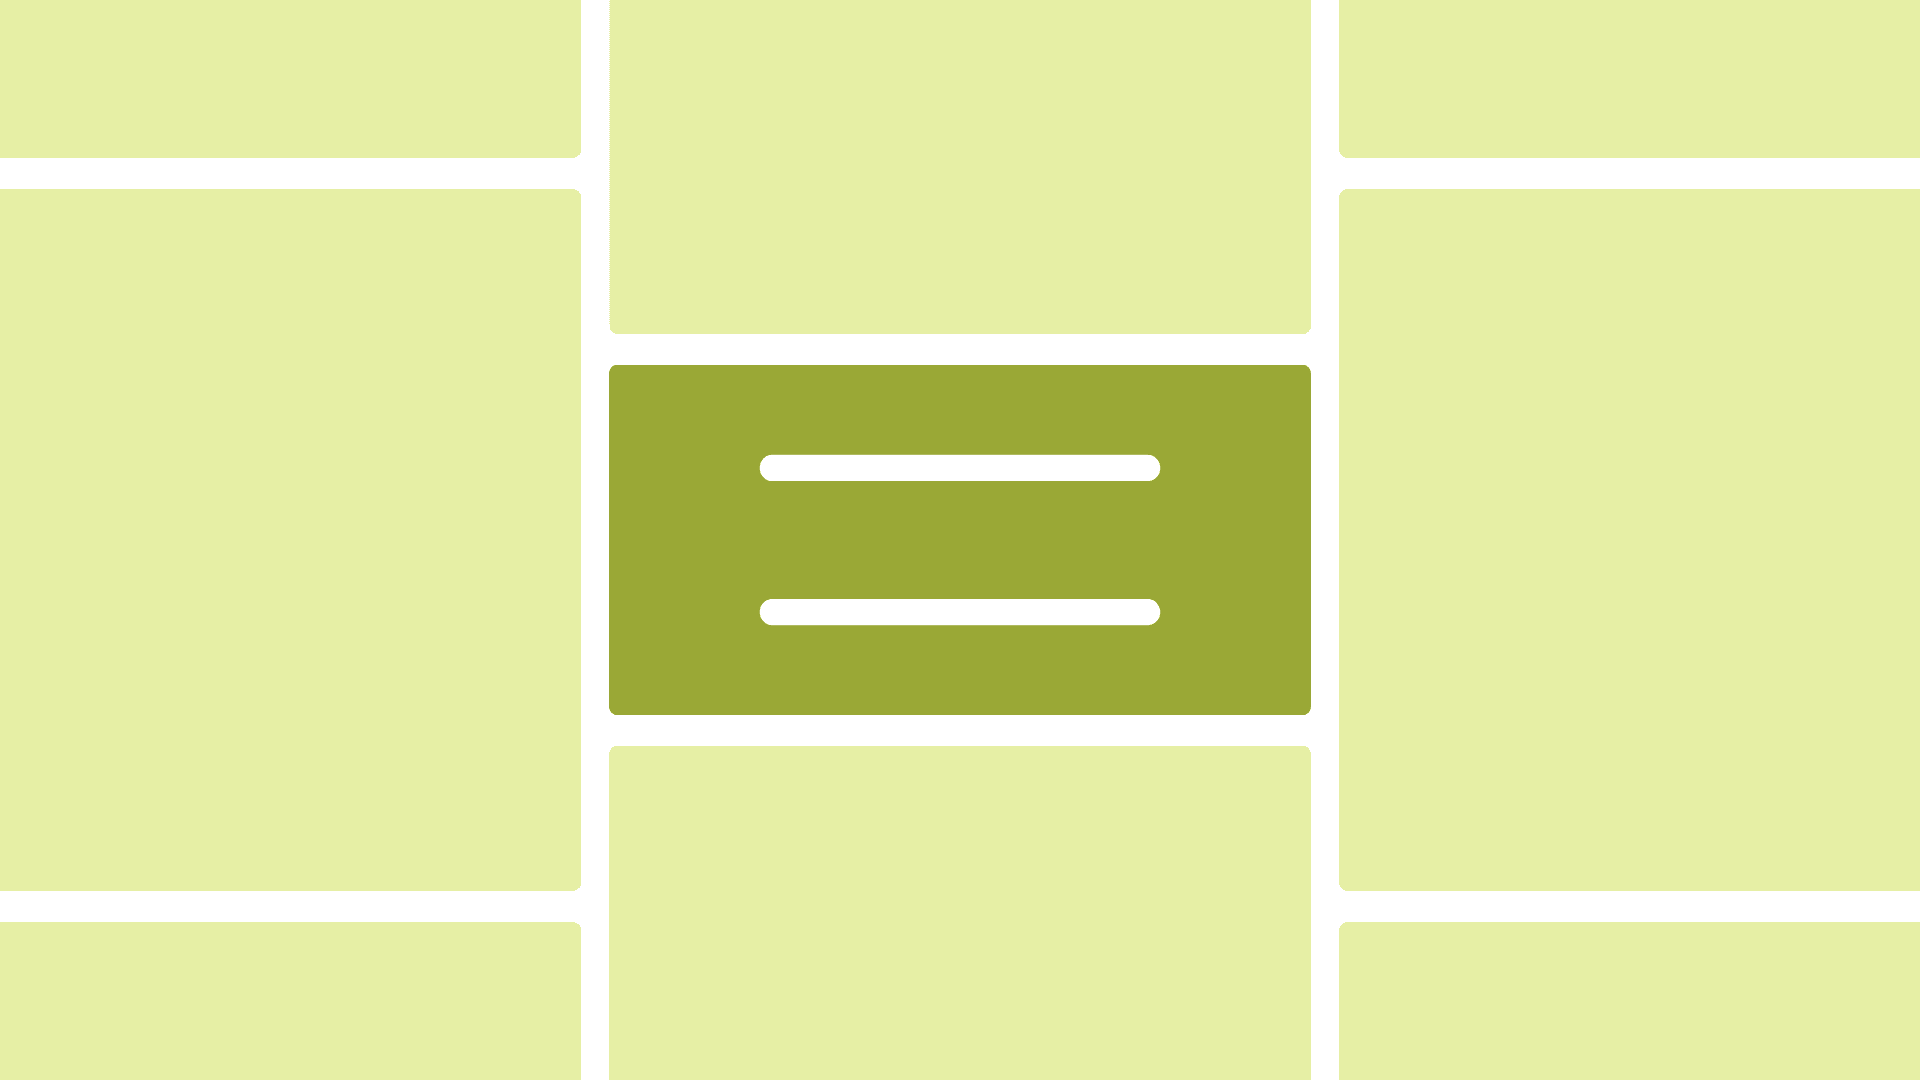 A bright green rectangle with white text to demonstrate how 2 lines of 20 characters looks